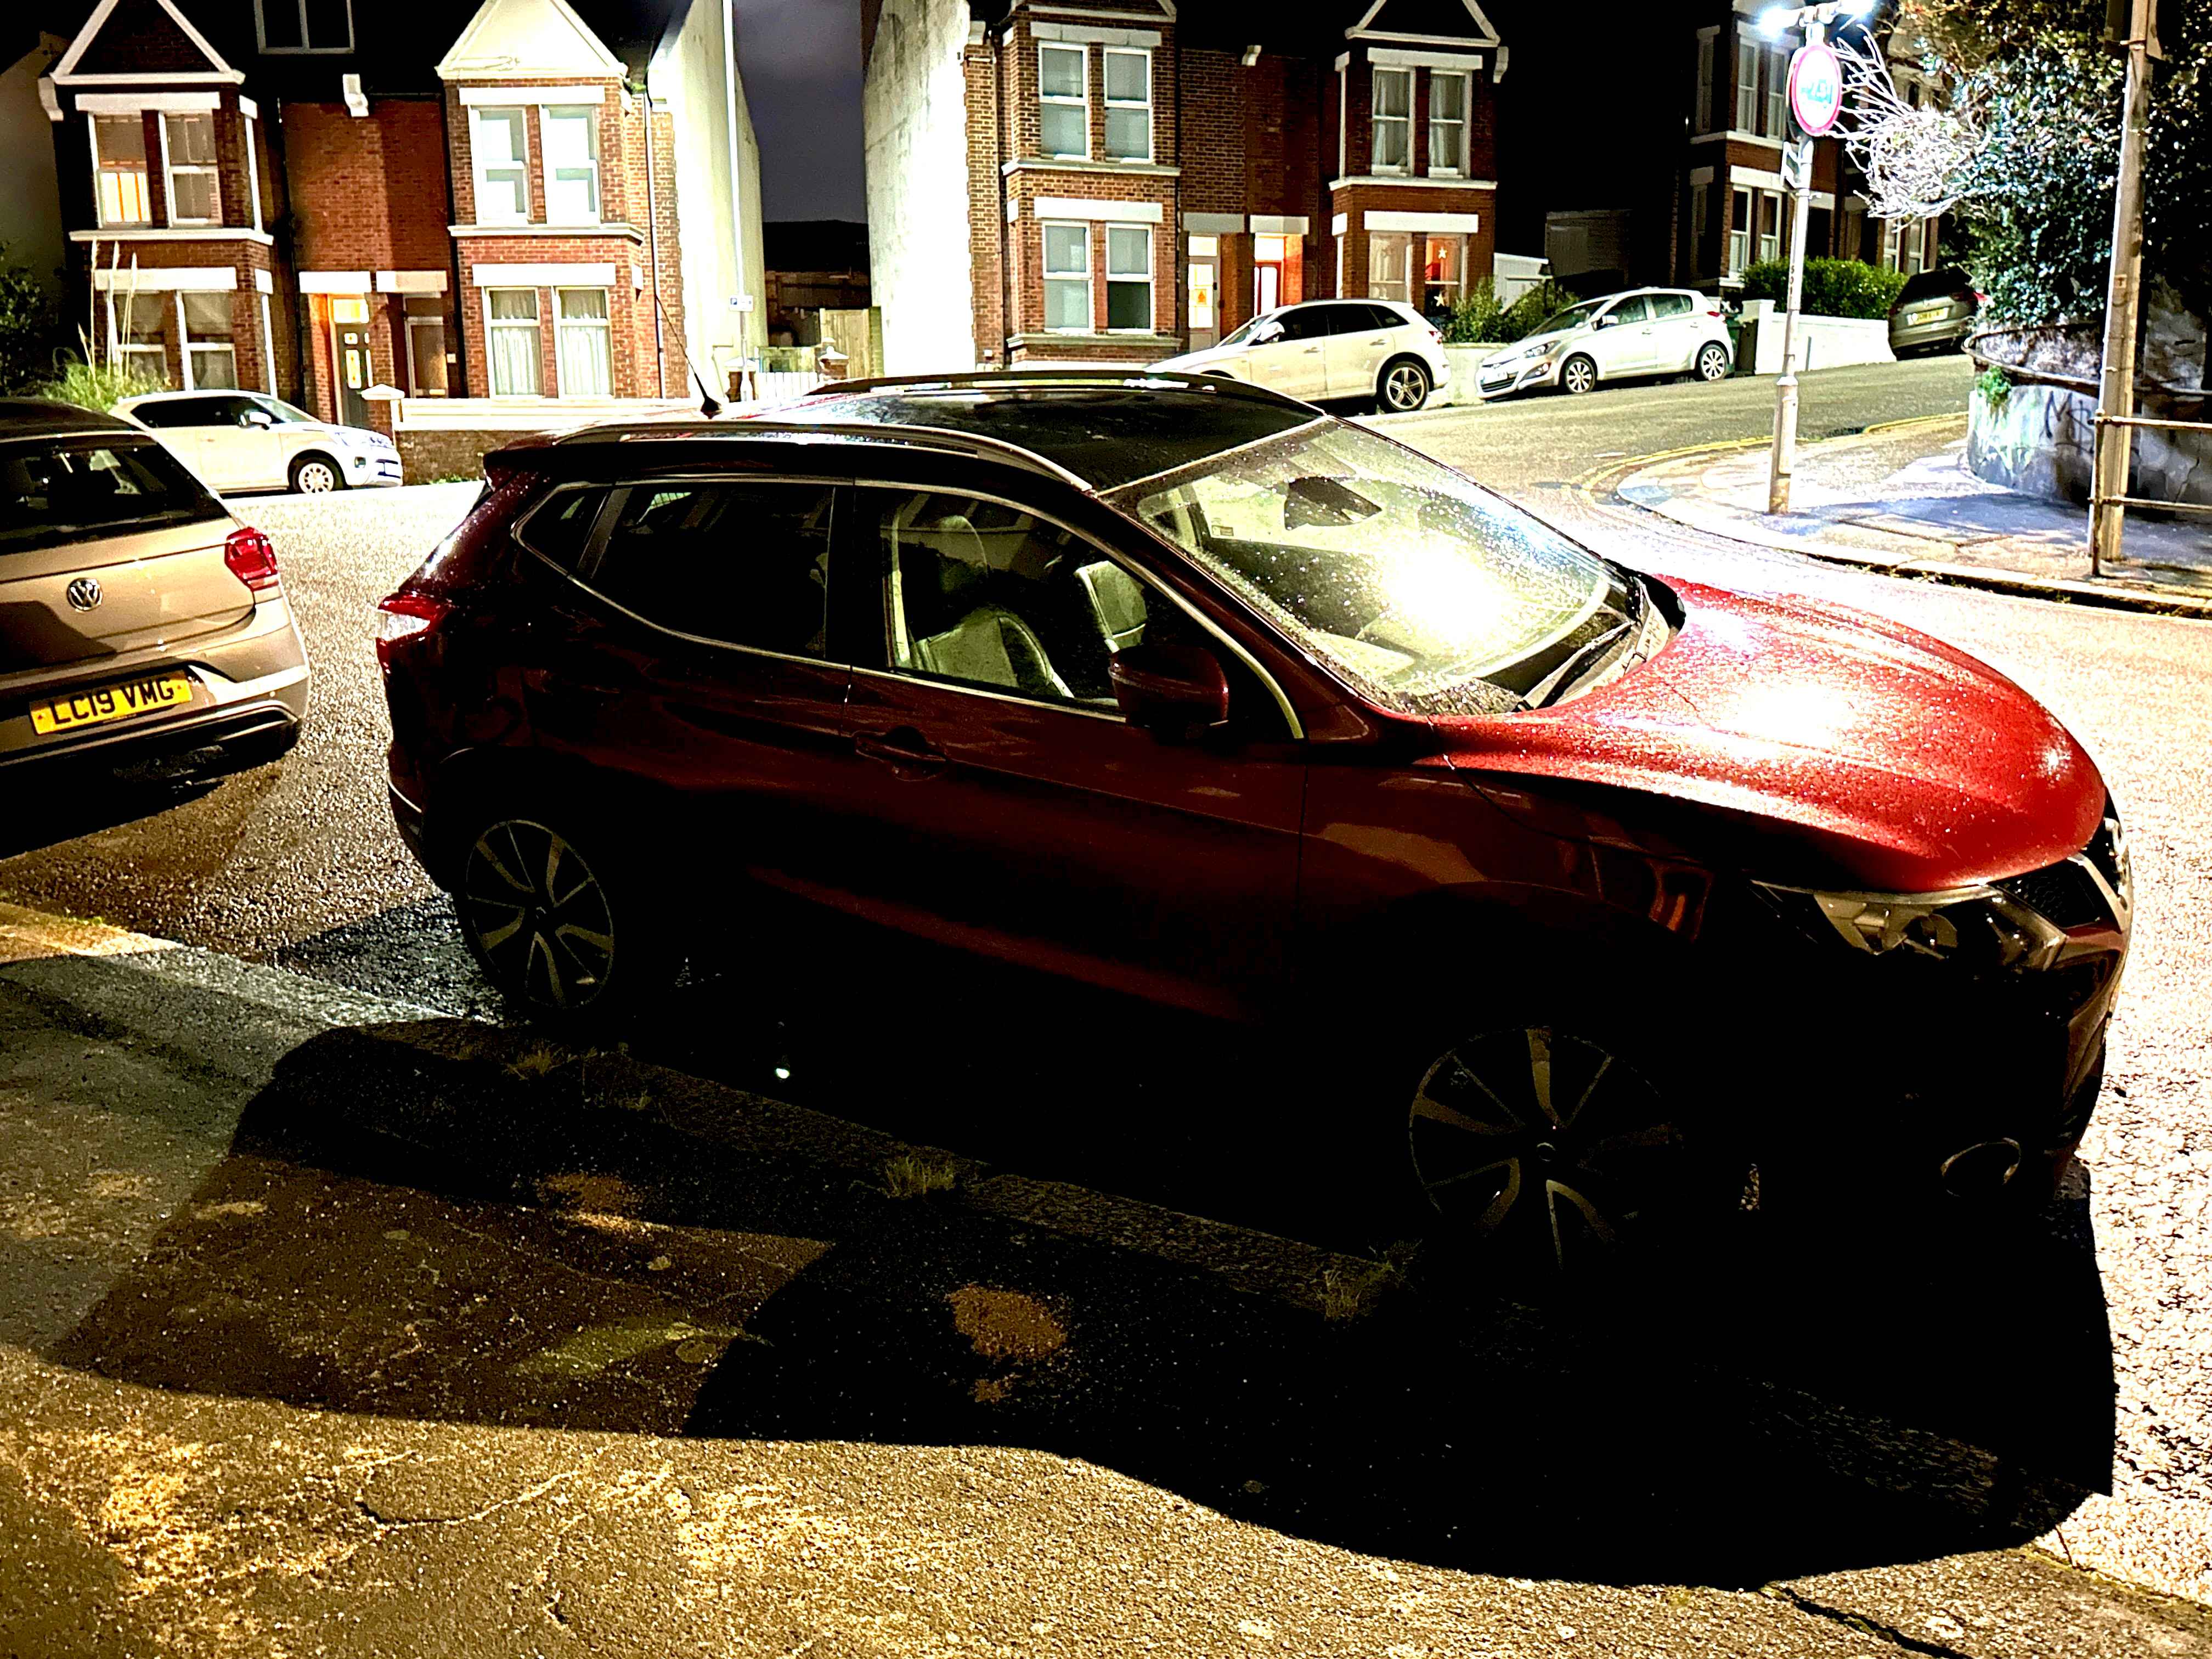 Photograph of GV17 ZWE - a Red Nissan Qashqai parked in Hollingdean by a non-resident. The third of four photographs supplied by the residents of Hollingdean.